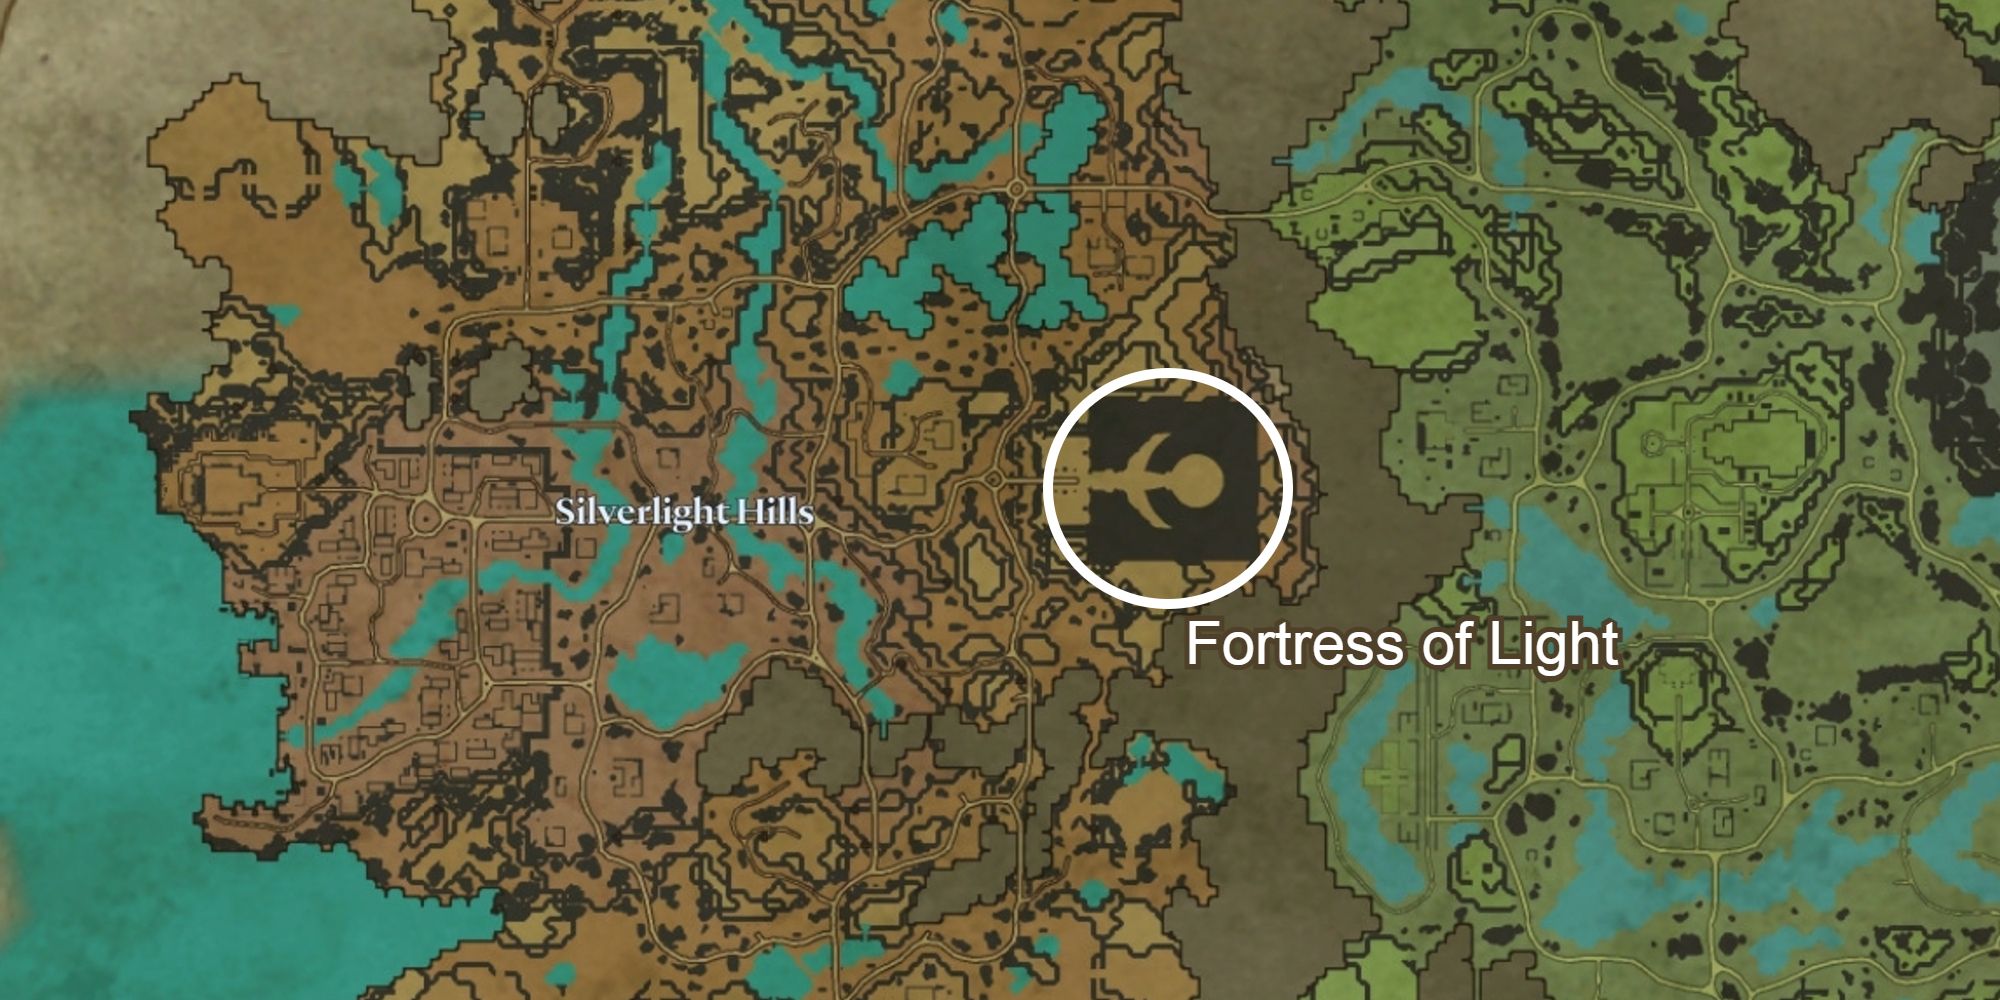 fortress of light location circled on map